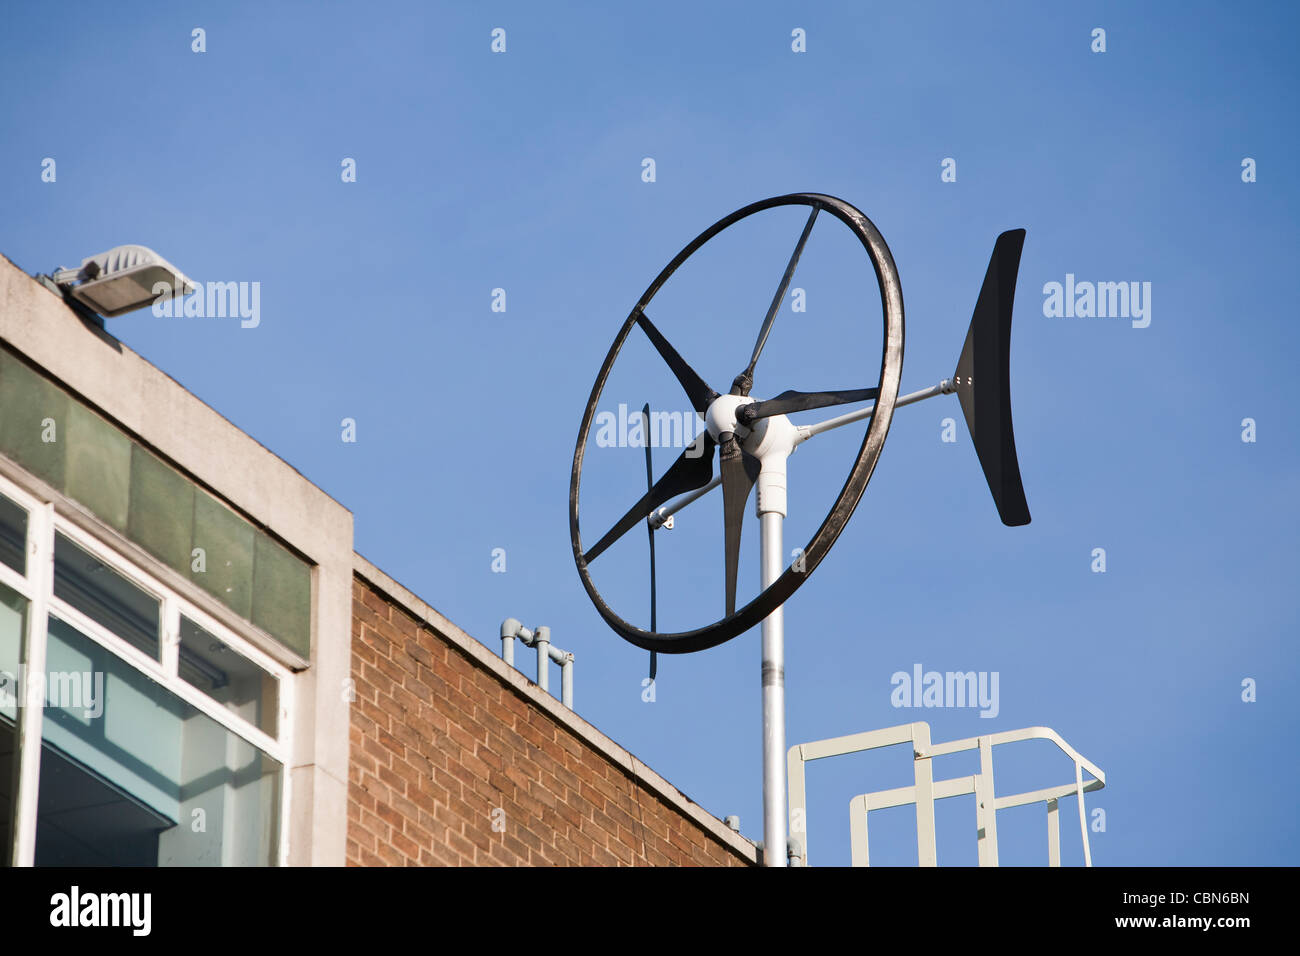 A vertical axis wind turbine at Newcastle campus of the University of Northumberland, UK. Stock Photo